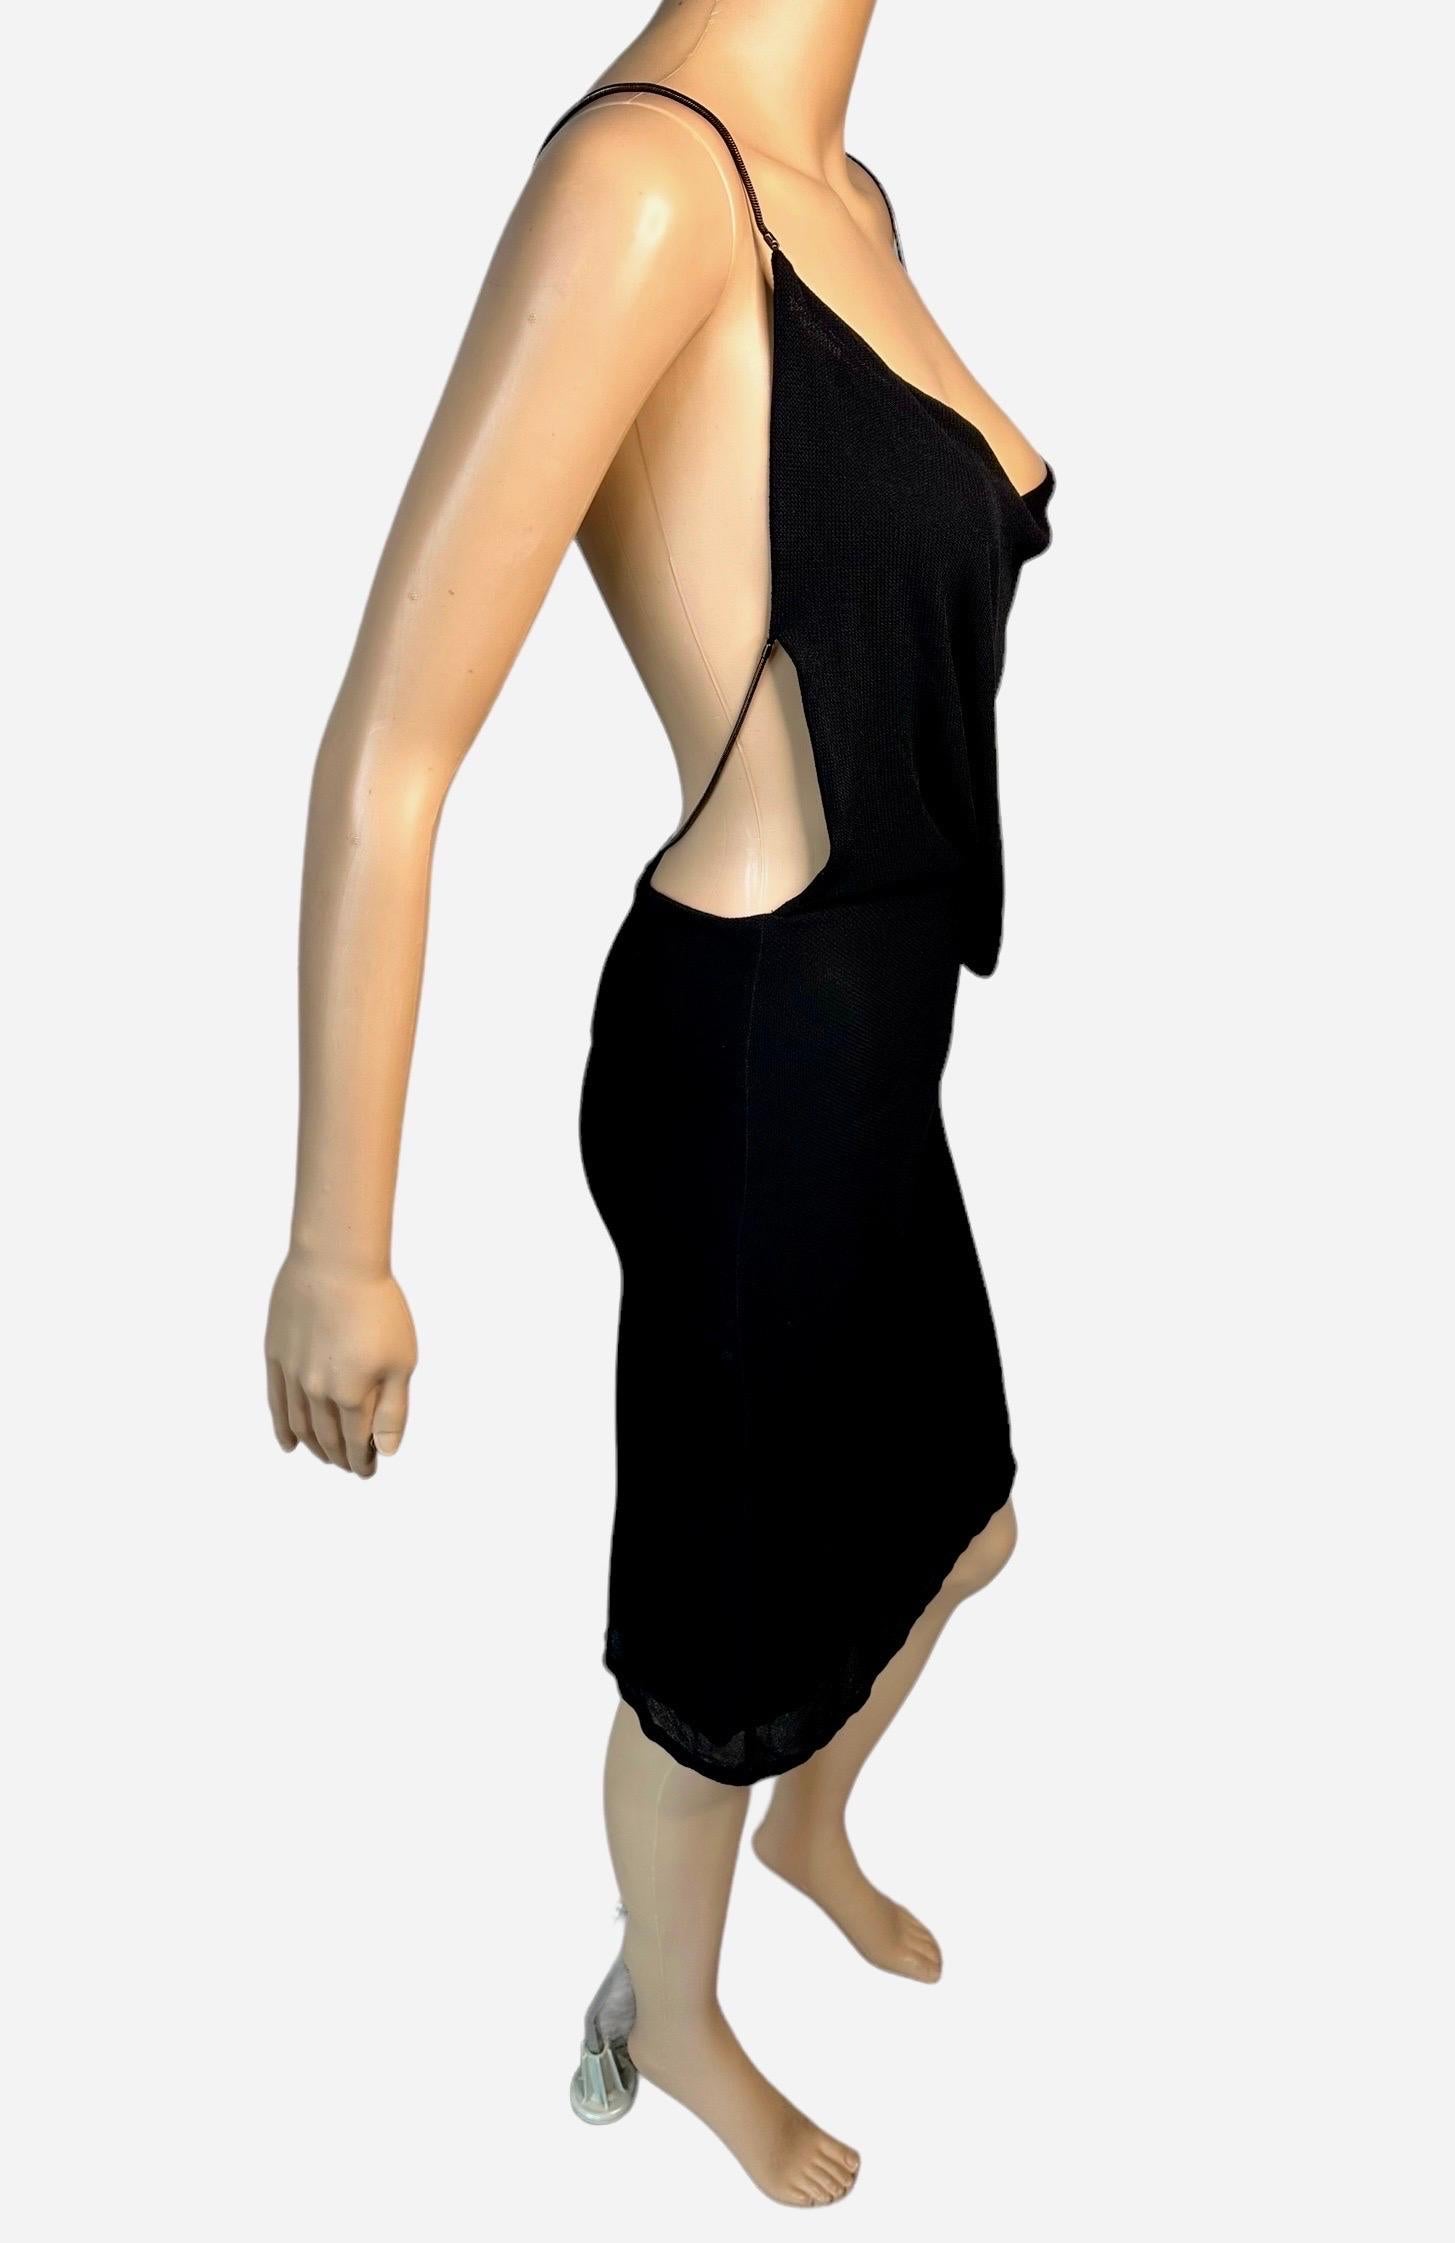 Tom Ford for Gucci S/S 1997 Runway Chain Cutout Backless Sheer Knit Black Dress For Sale 5